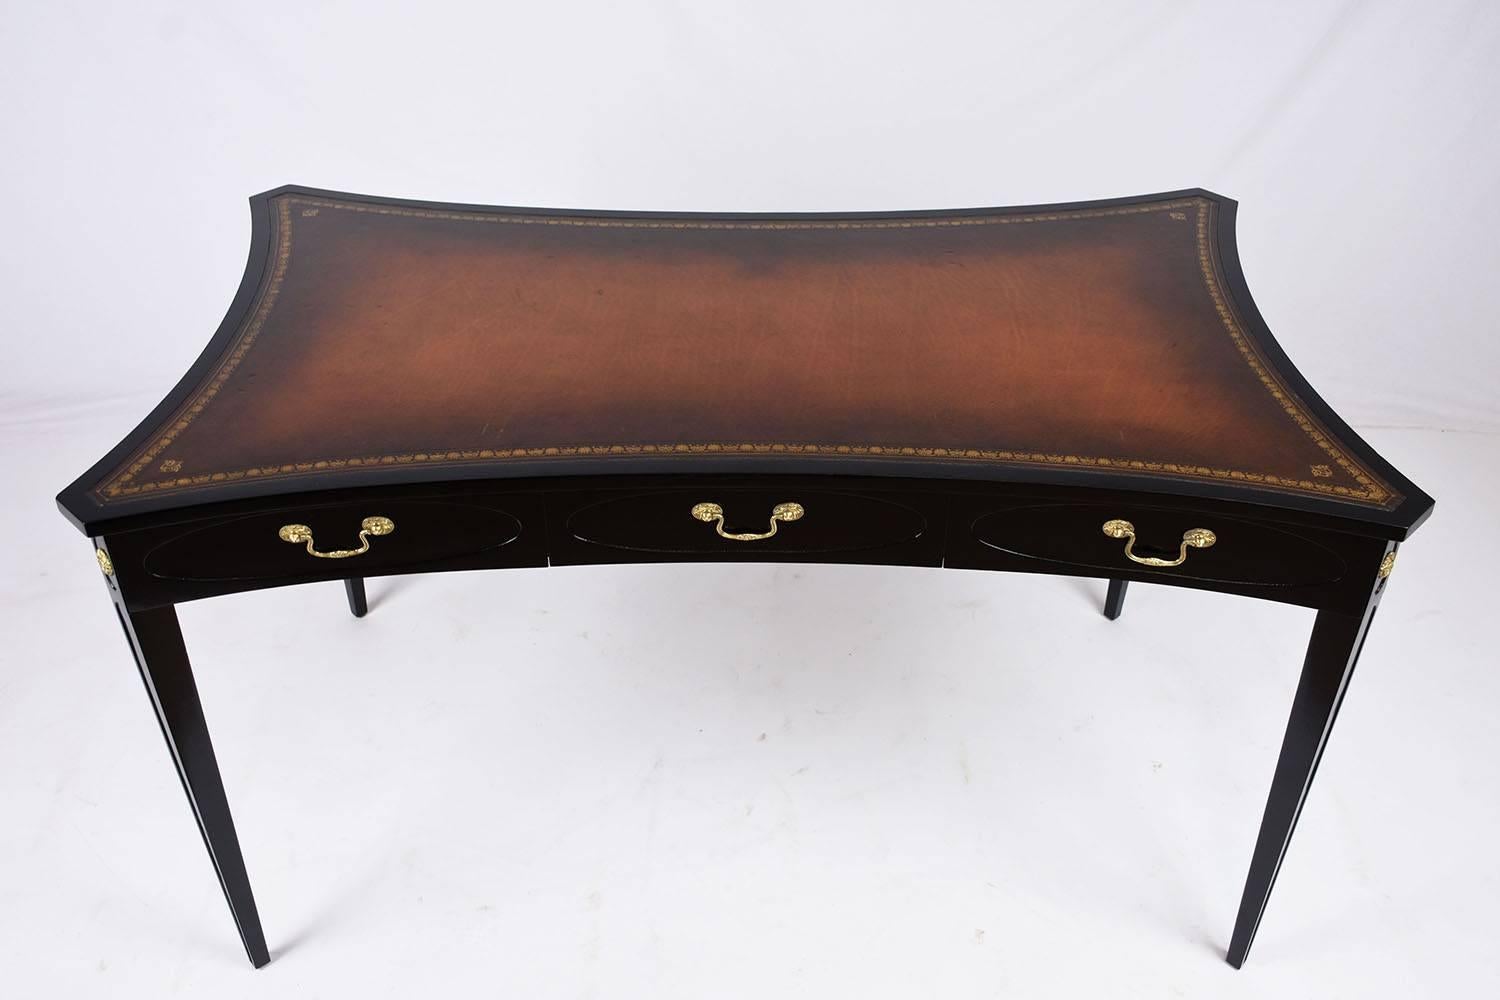 This 1980s vintage Regency-style desk is made of mahogany wood that has been stained in a rich black color with a lacquered finish. The top of the desk is uniquely shaped with an arc edge design. The simple design of the desk is accented by the